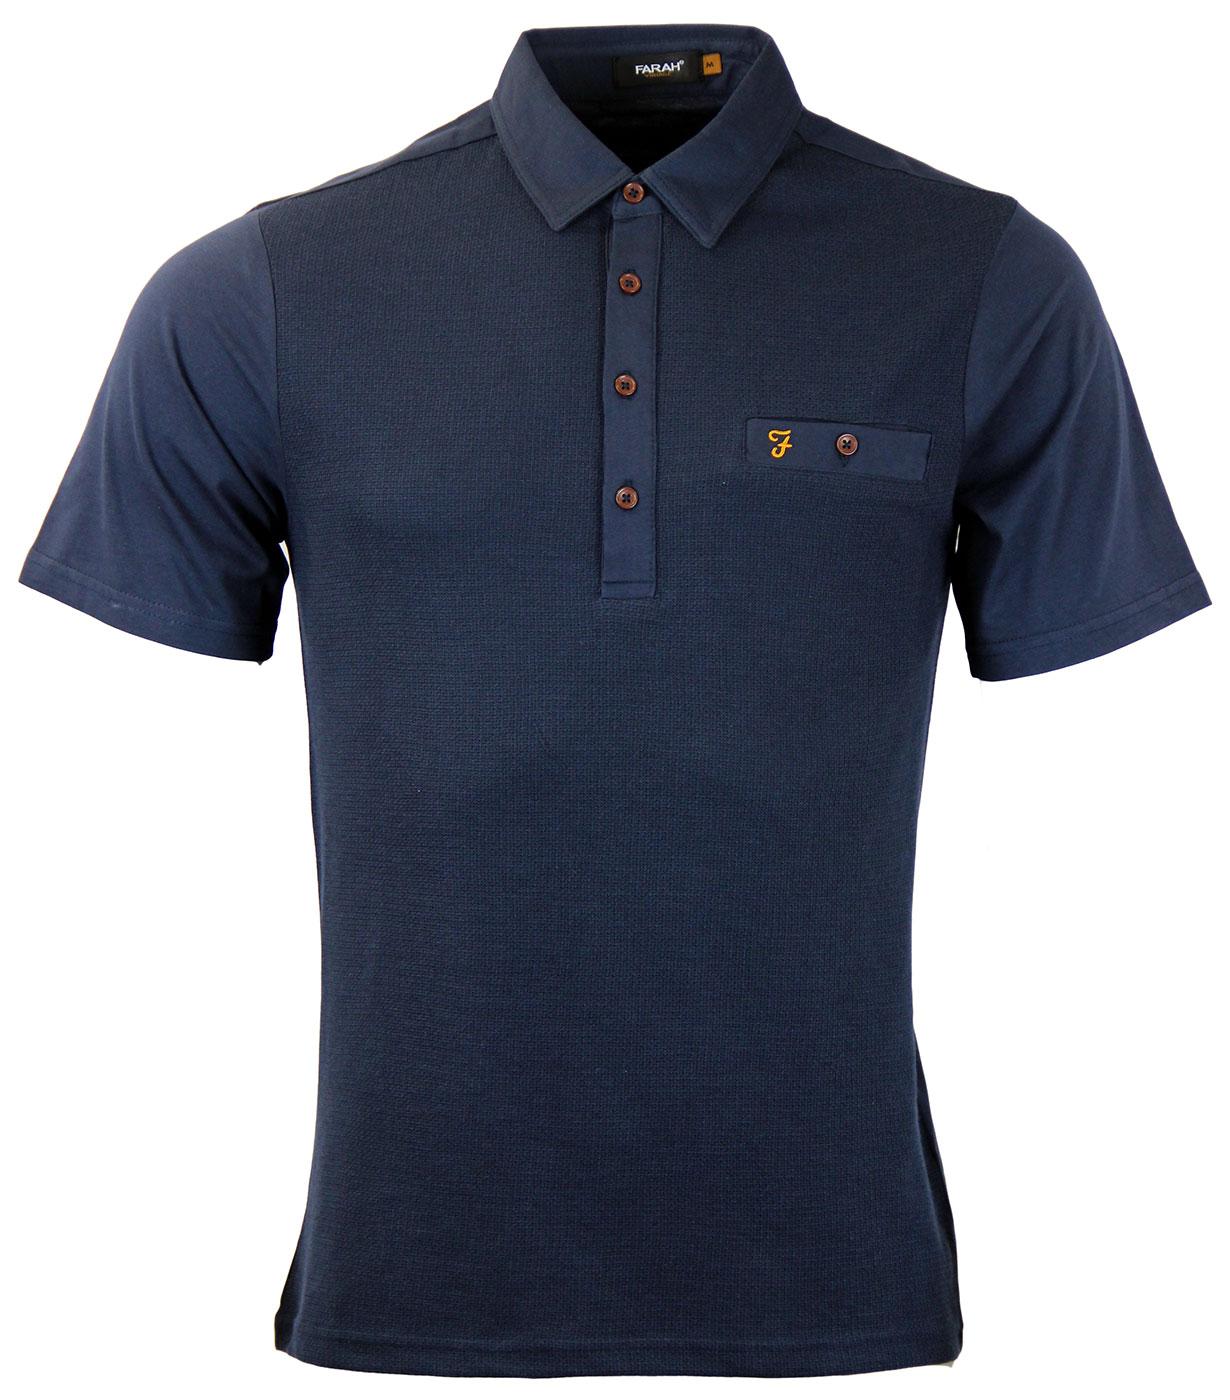 Farah Vintage Lester Retro 60s Mod S/S Textured Polo Top in Navy